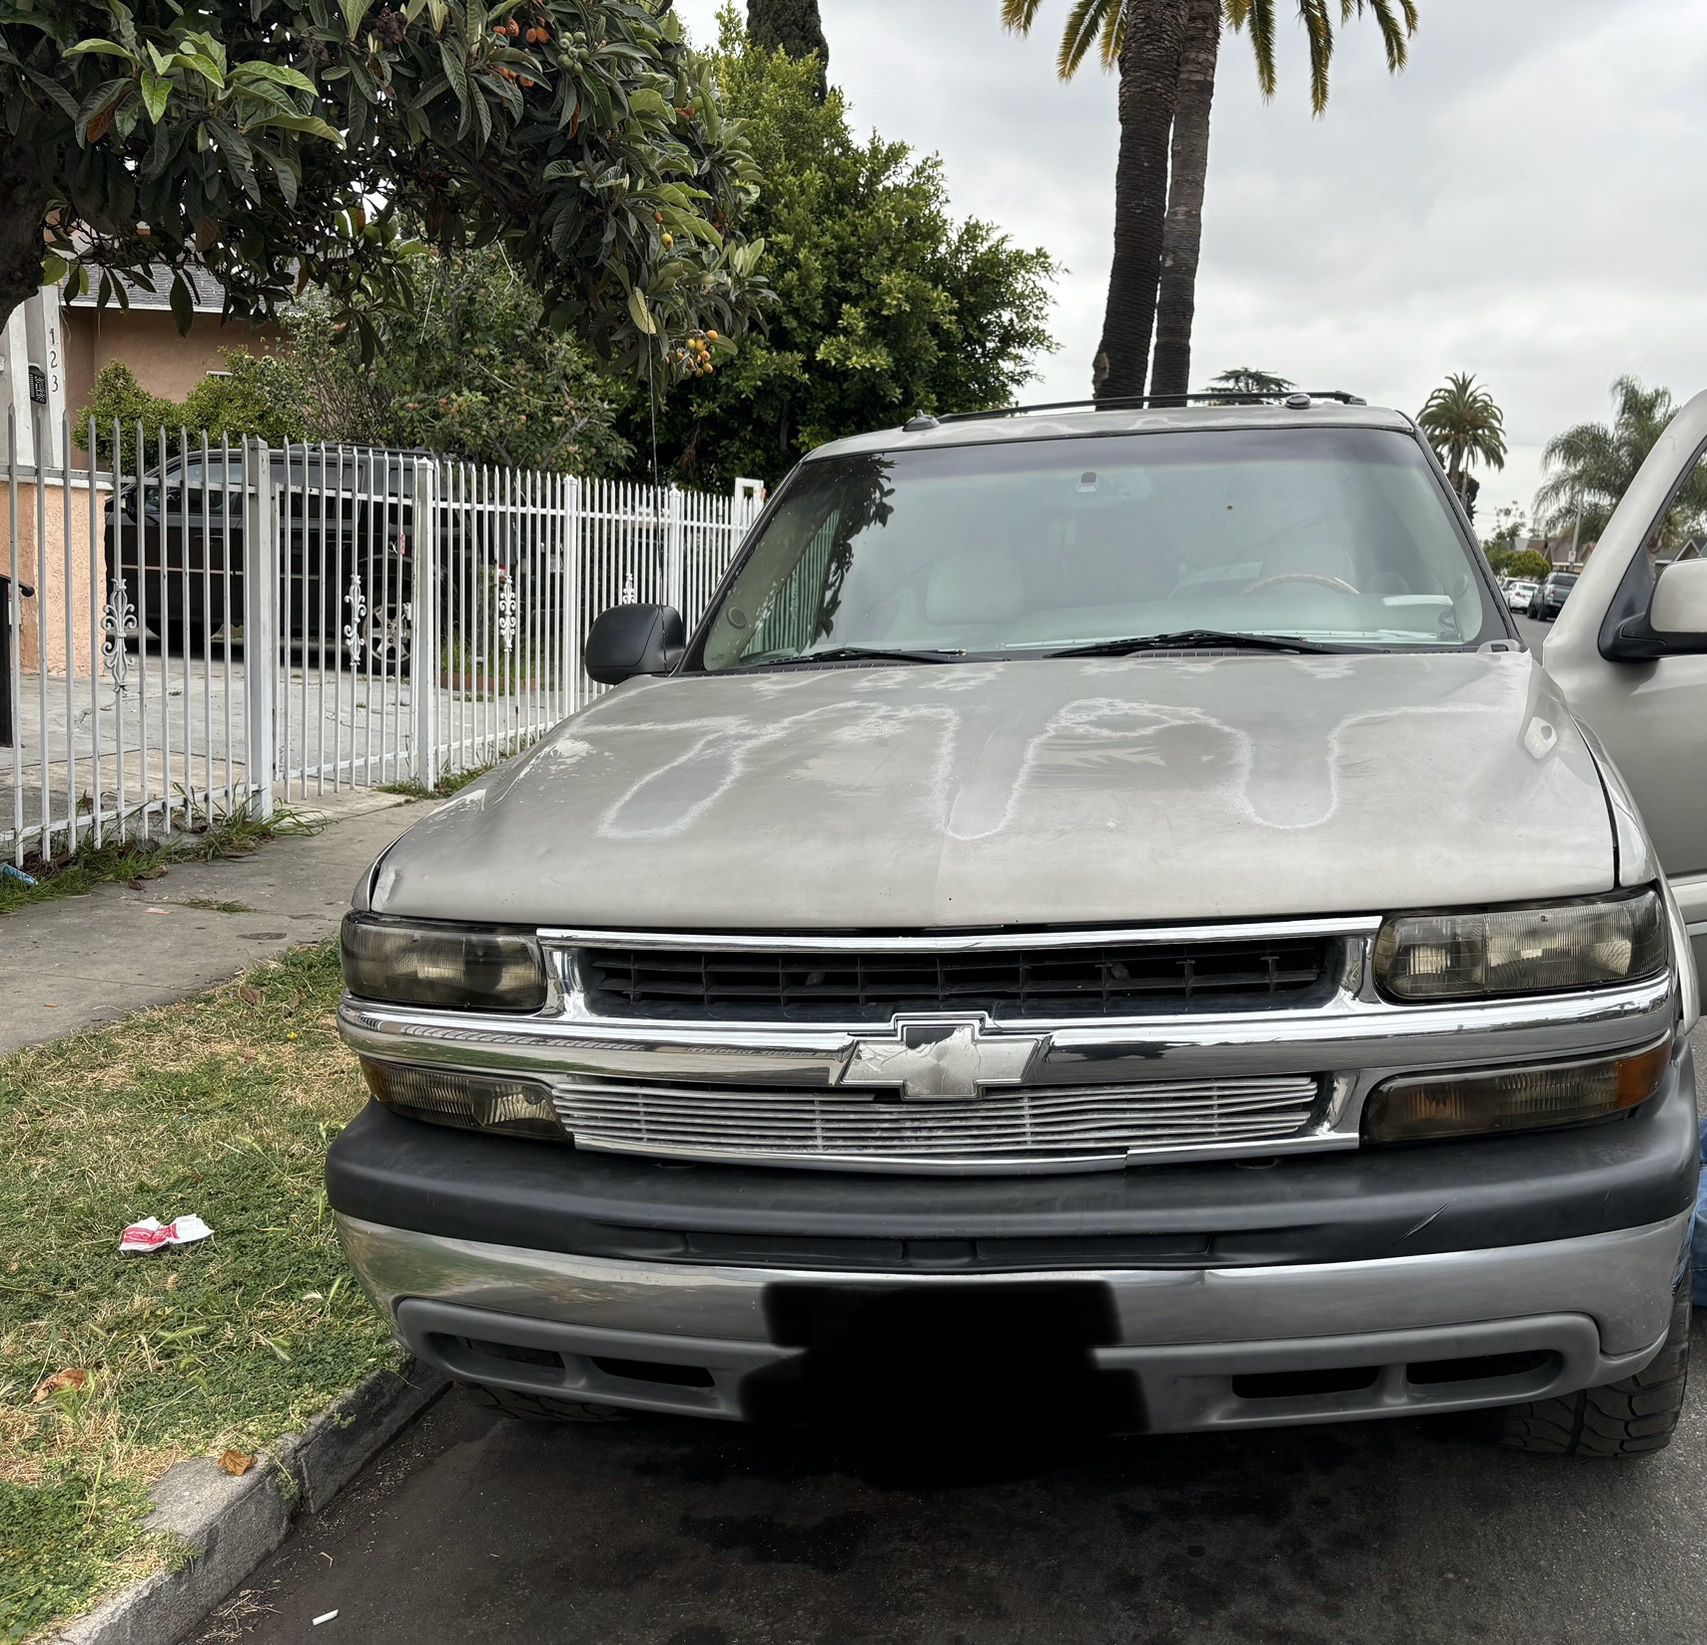 2004 Chevy Tahoe Selling Parts (parting Out)